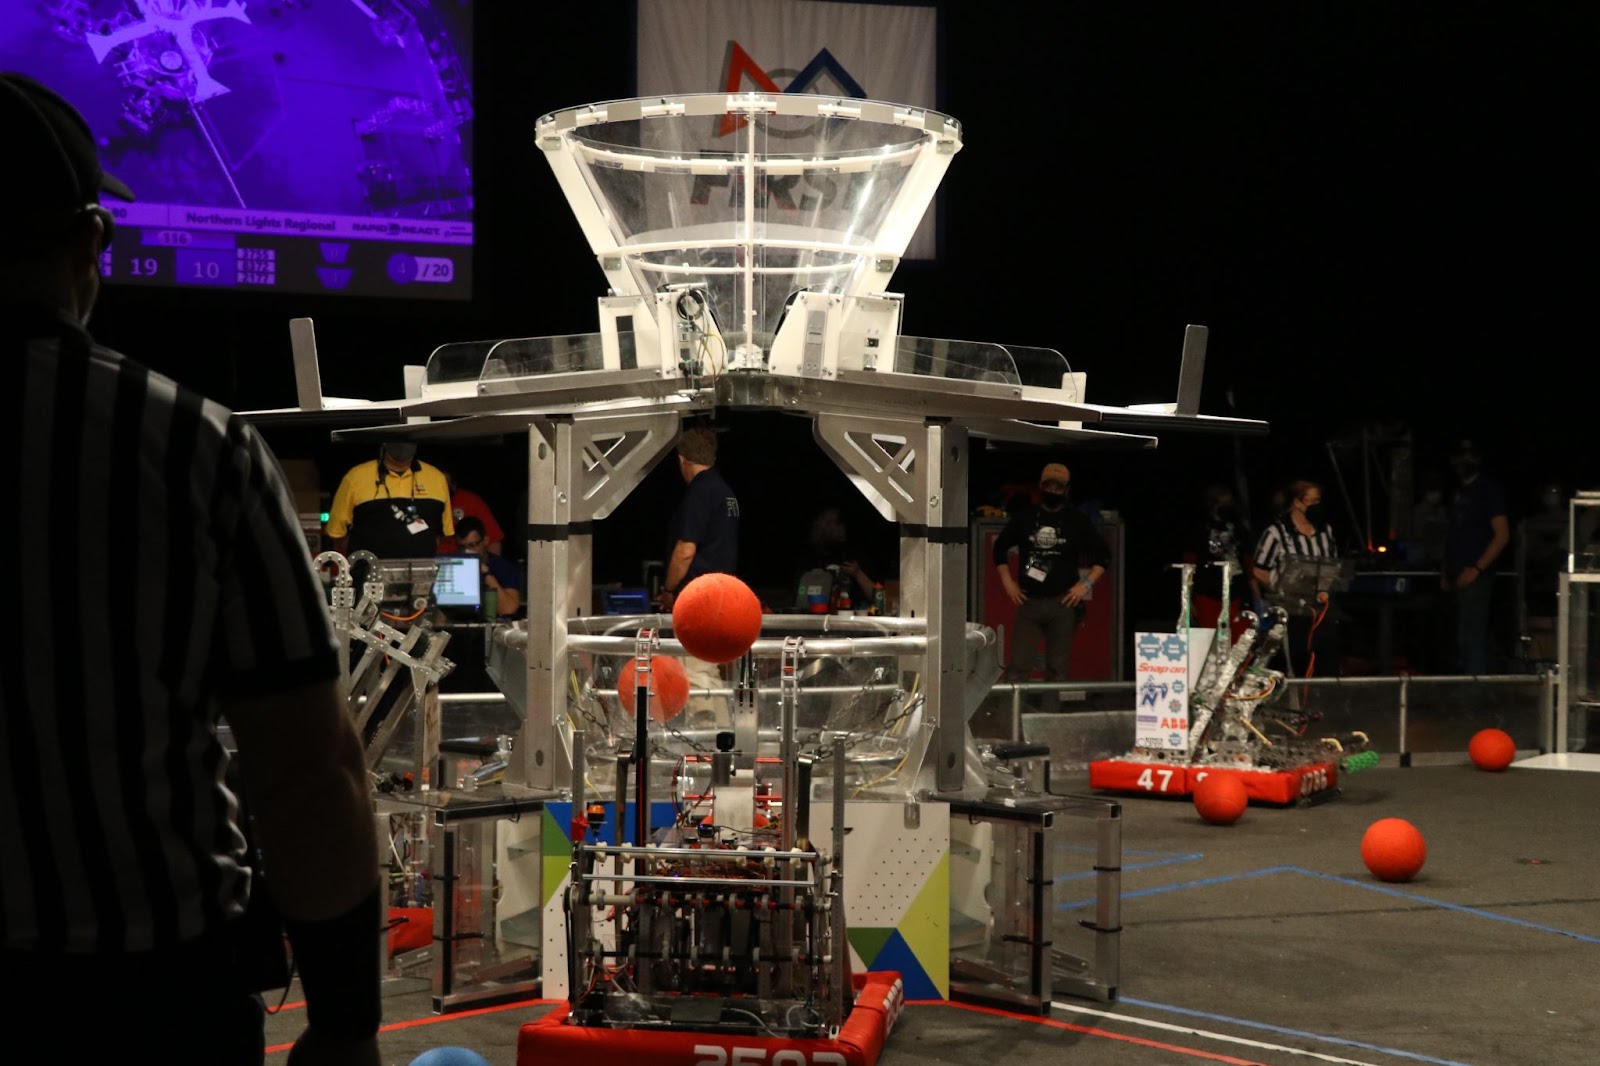 The robot shooting a ball into the lower funnel.